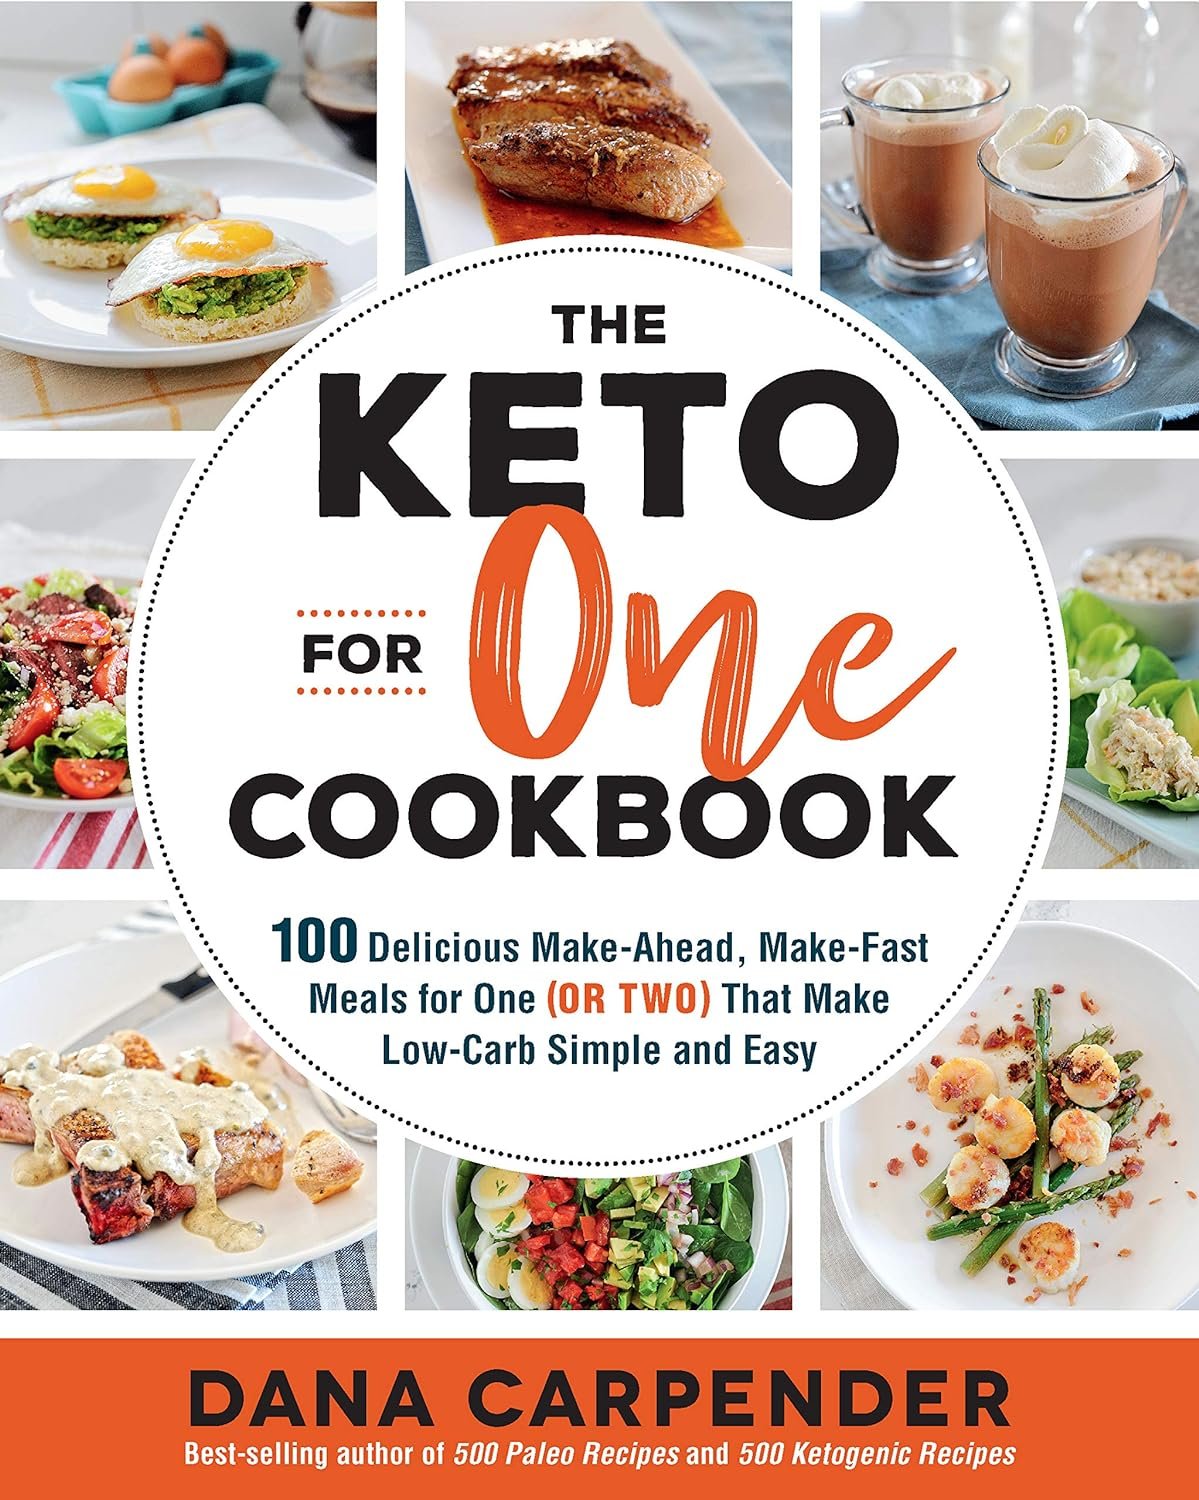 The Keto For One Cookbook: 100 Delicious Make-Ahead, Make-Fast Meals for One (or Two) That Make Low-Carb Simple and Easy (Volume 8) (Keto for Your Life, 8)